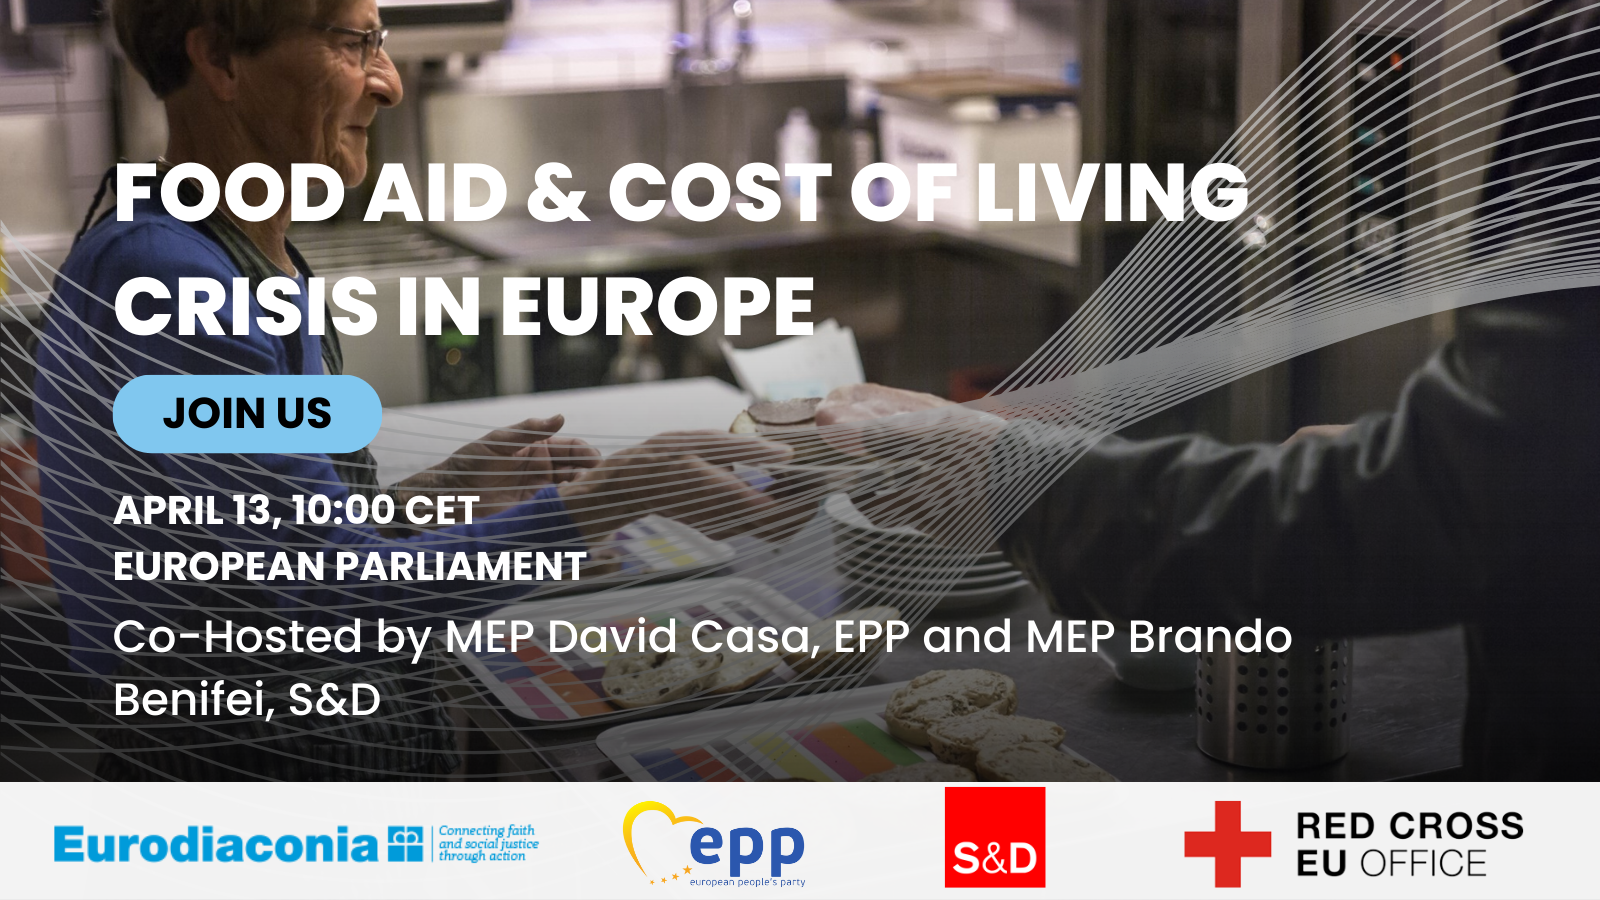 Joint event with Red Cross EU on Food Aid and Cost of Living Crisis | Roundtable European Parliament